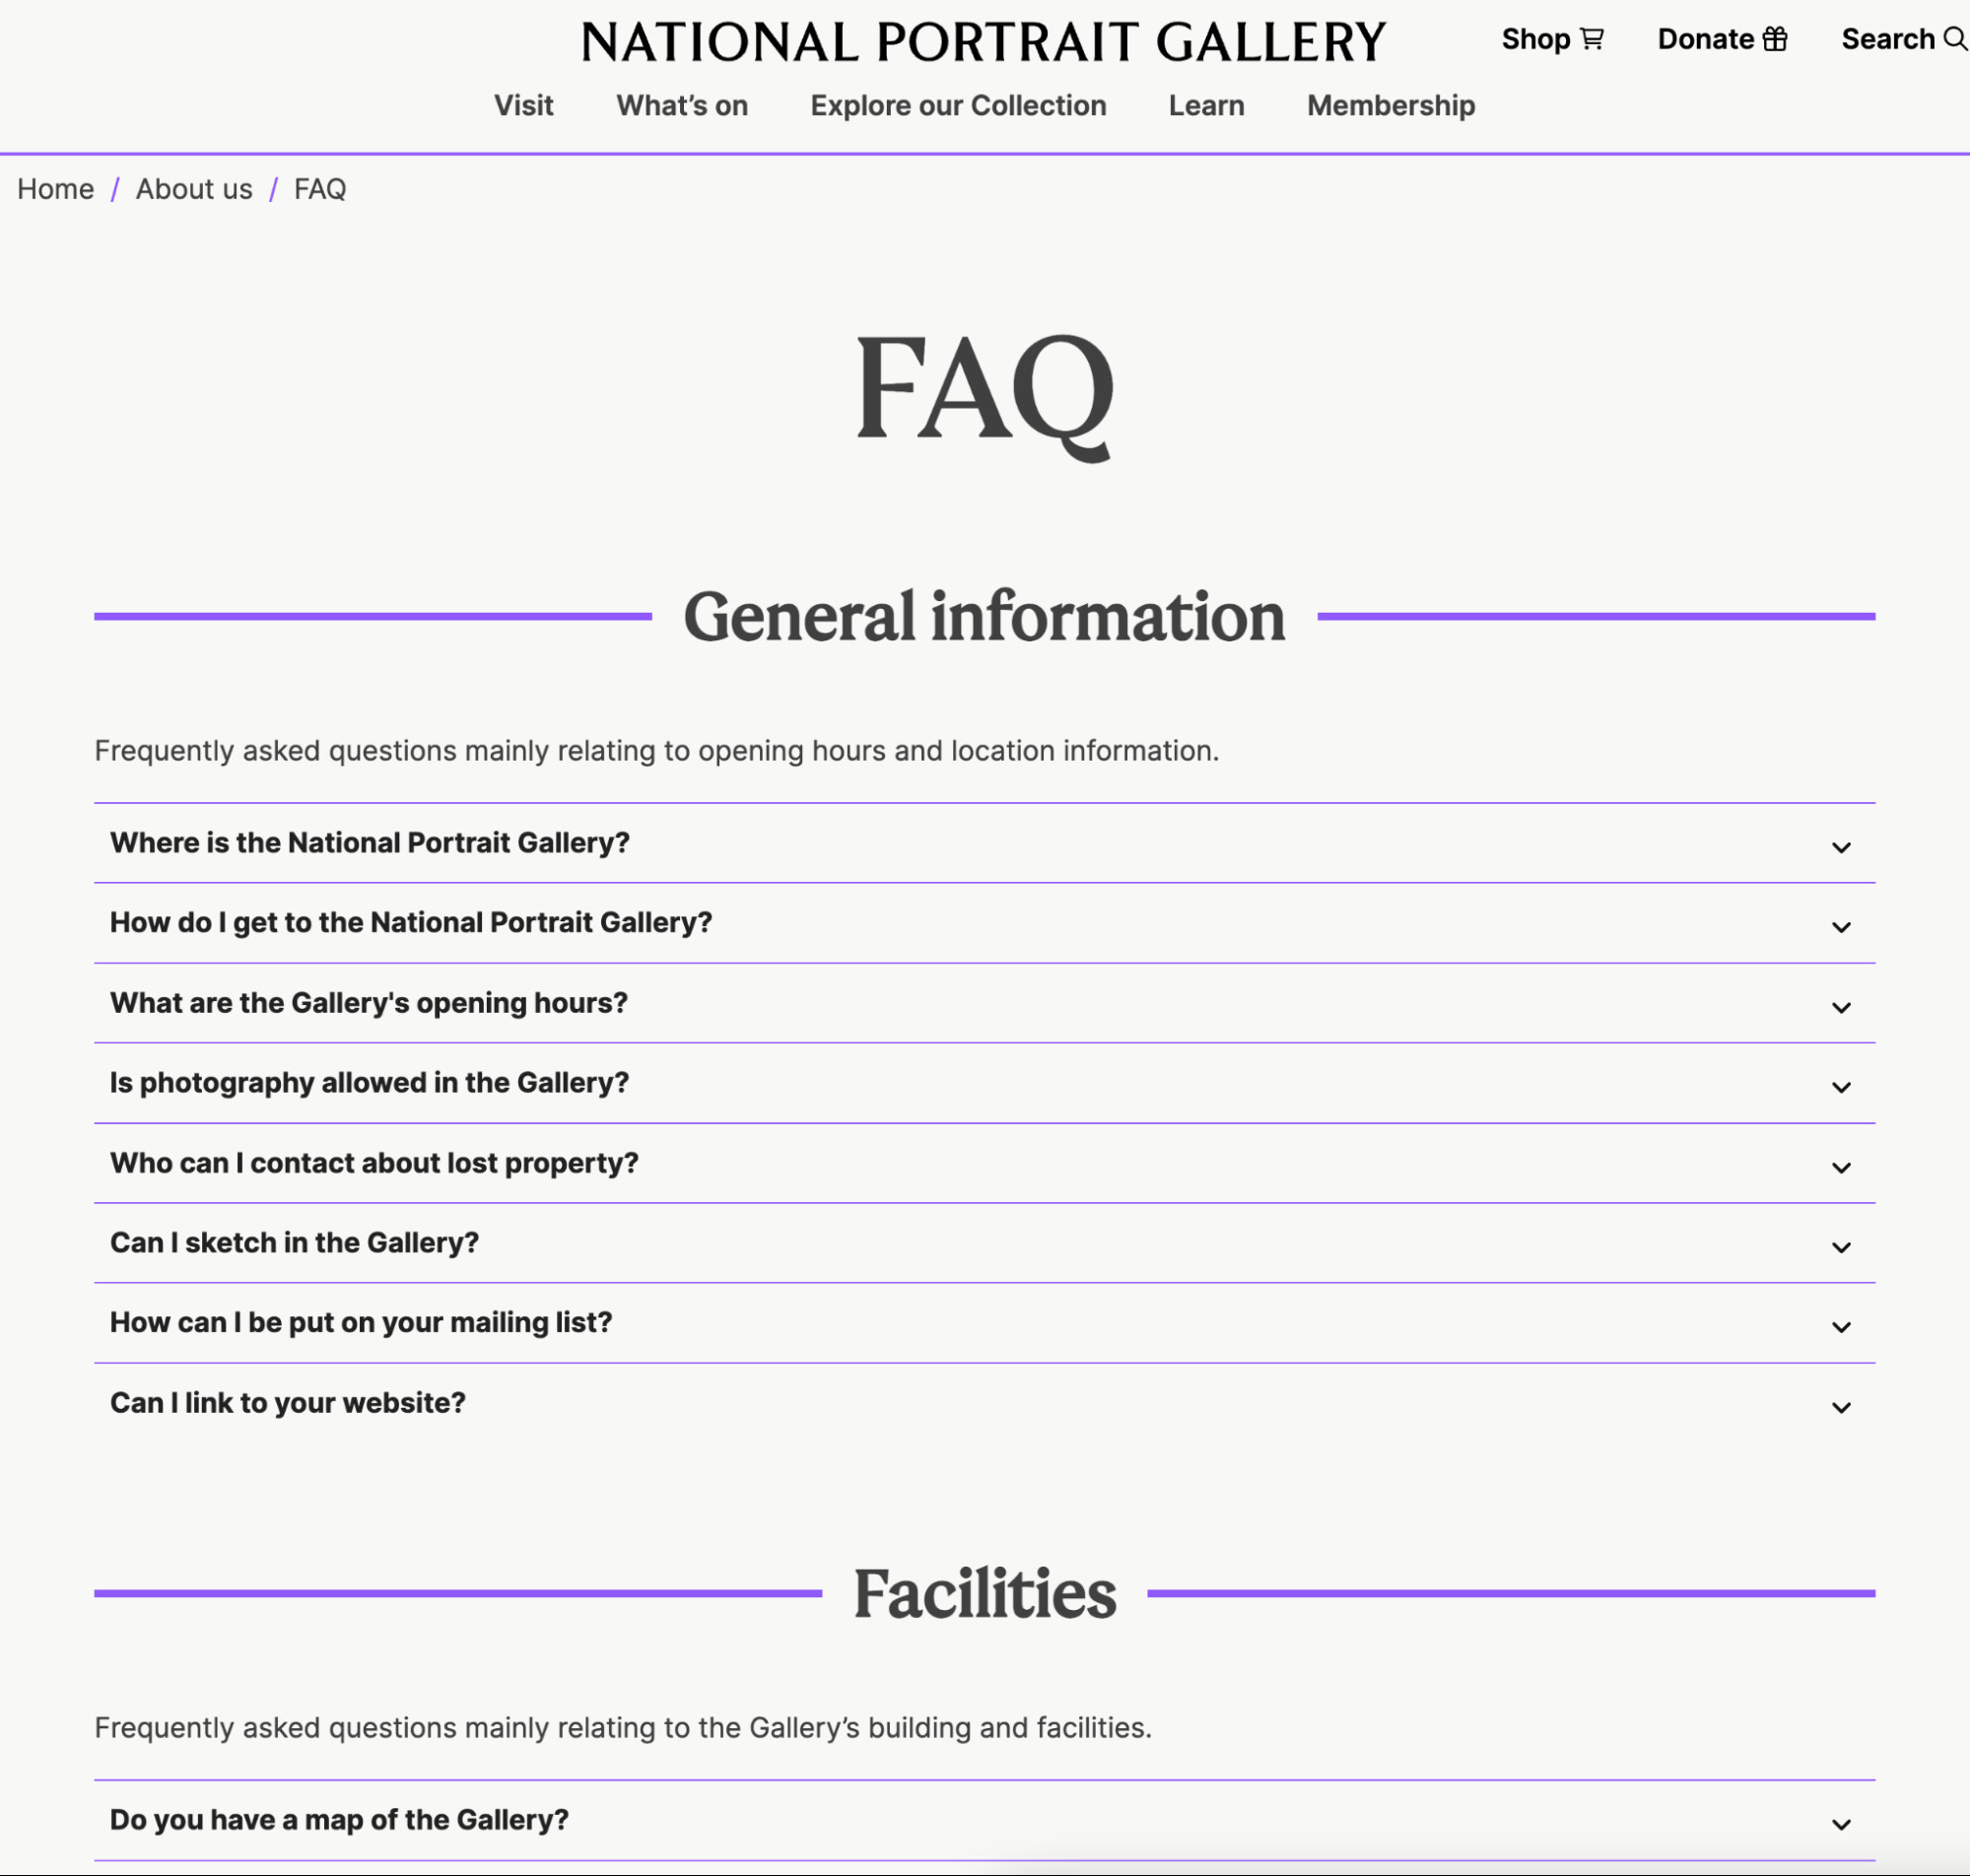 National Portrait Gallery’s FAQ page questions categorized into General Information and What’s On